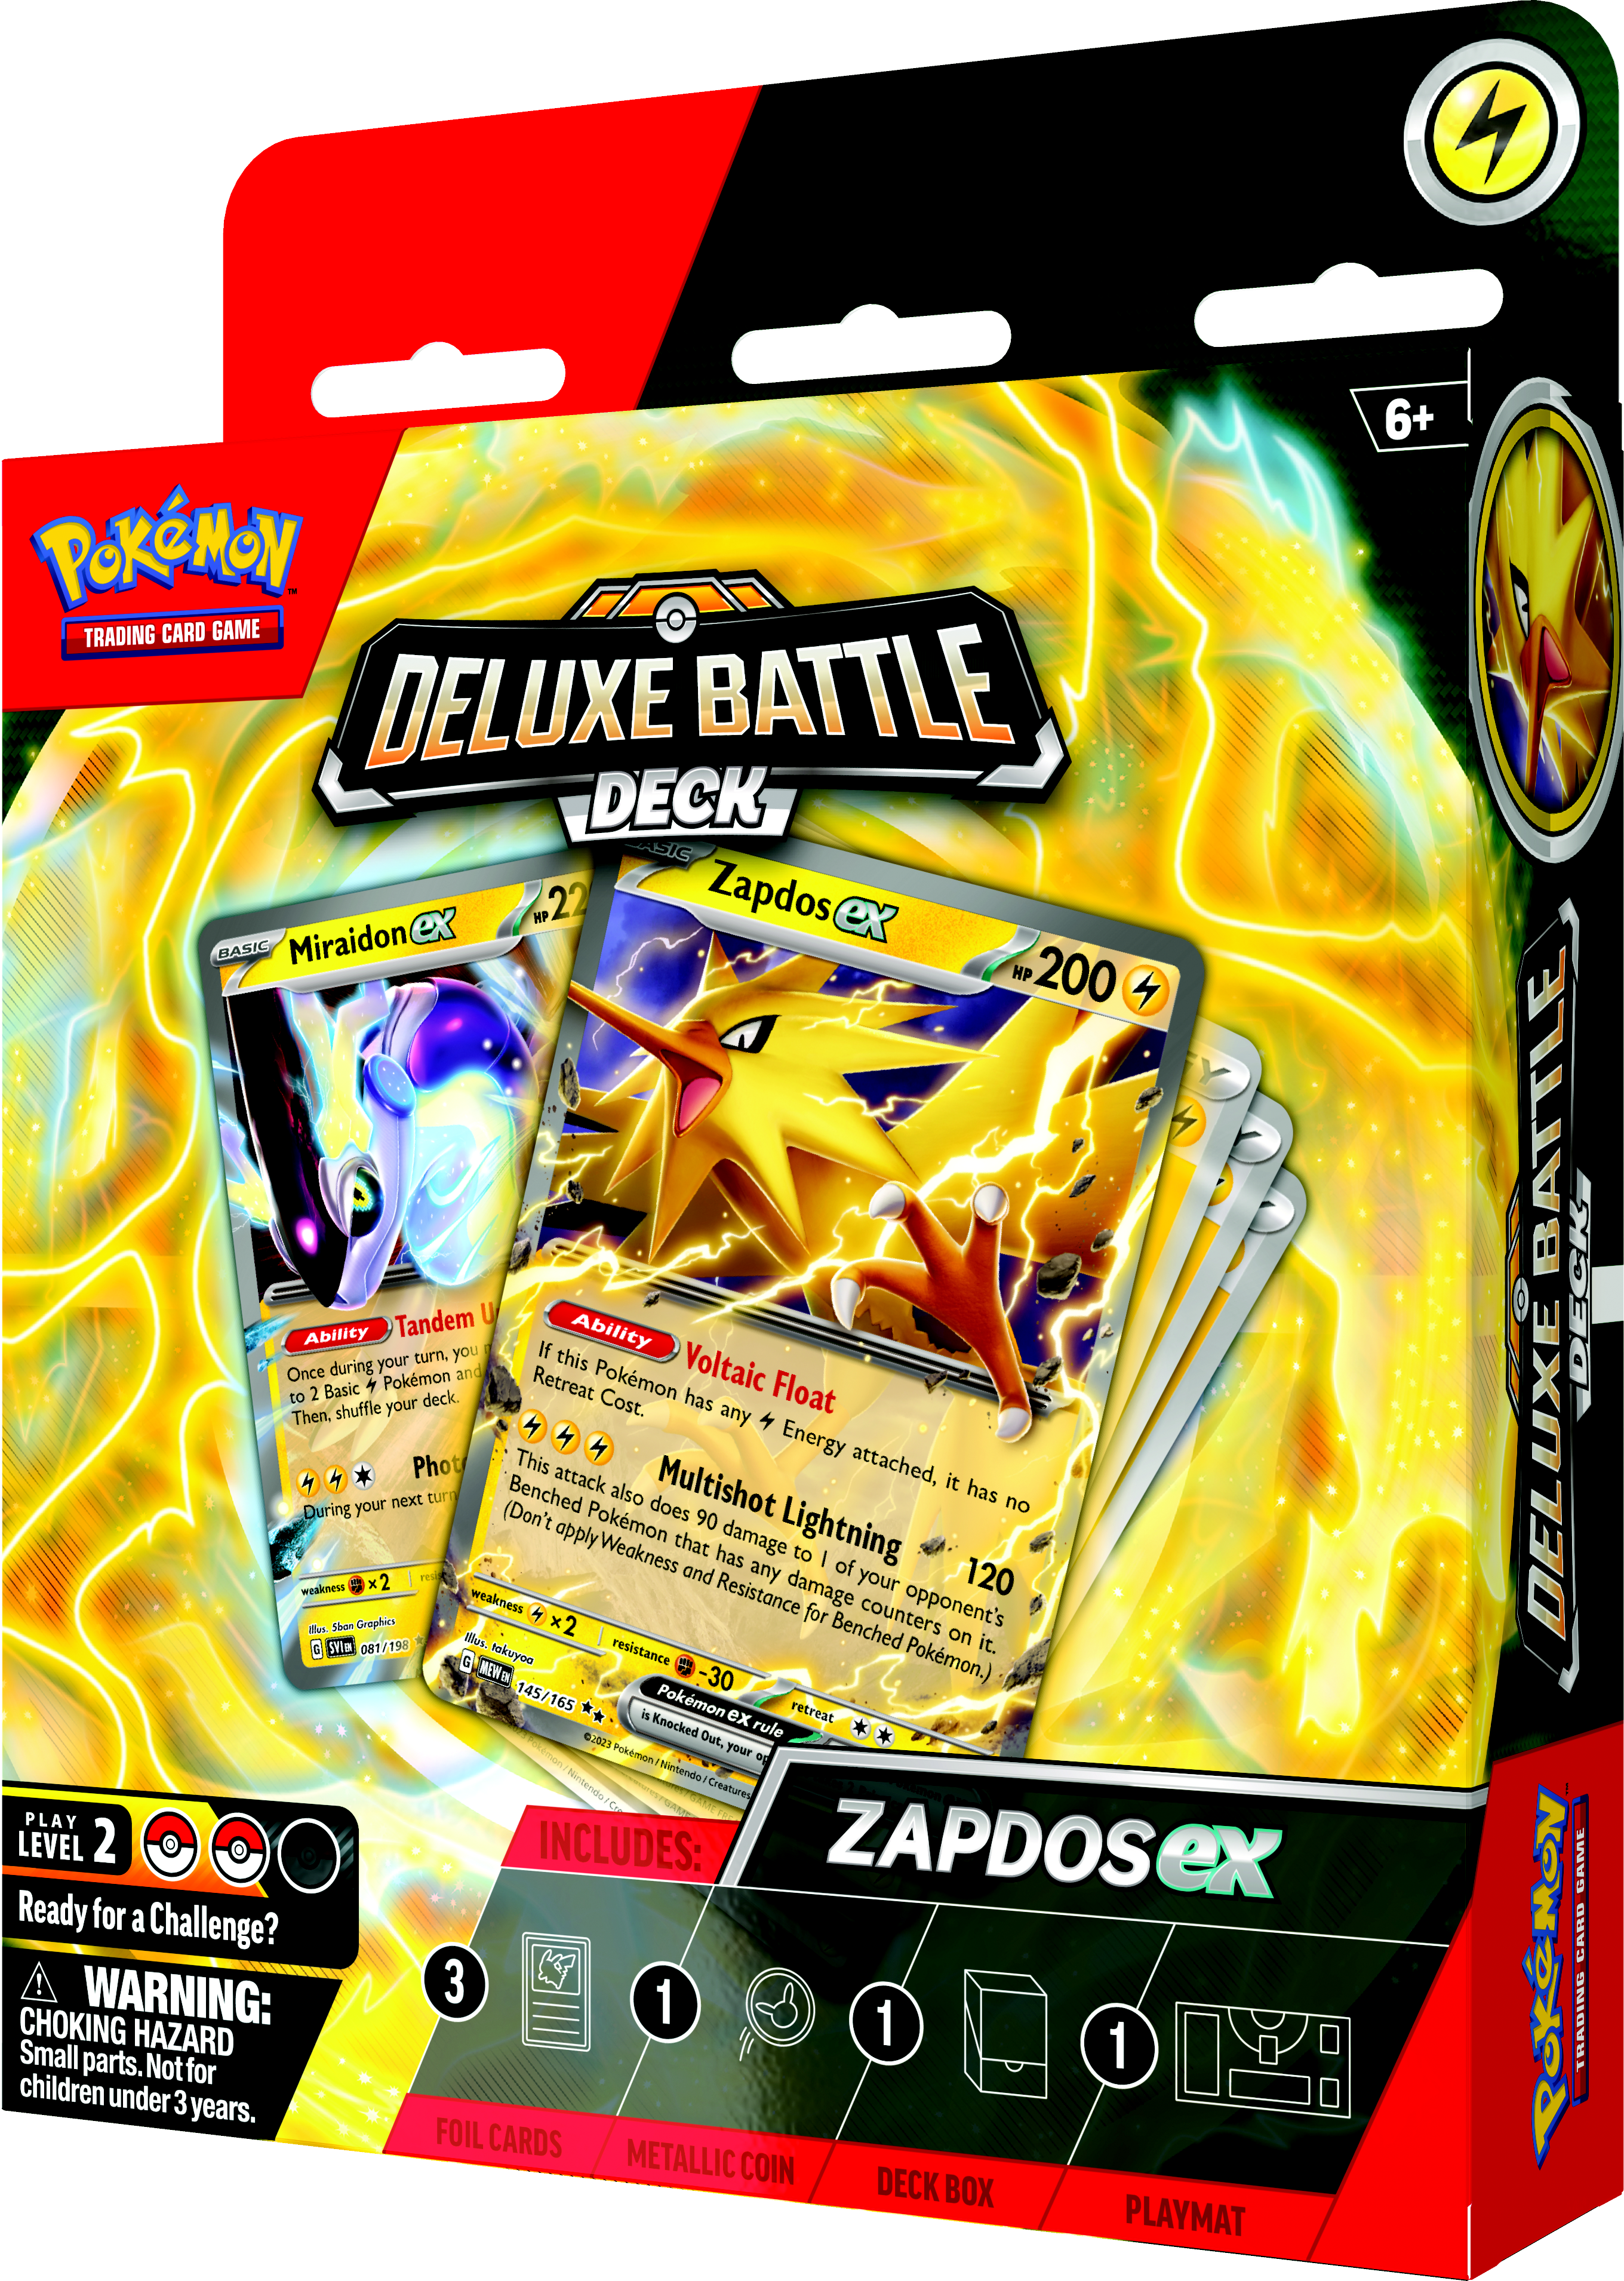 Pokemon Trading Card Game: Ninetales ex OR Zapdos ex Deluxe Battle Deck (Styles May Vary)